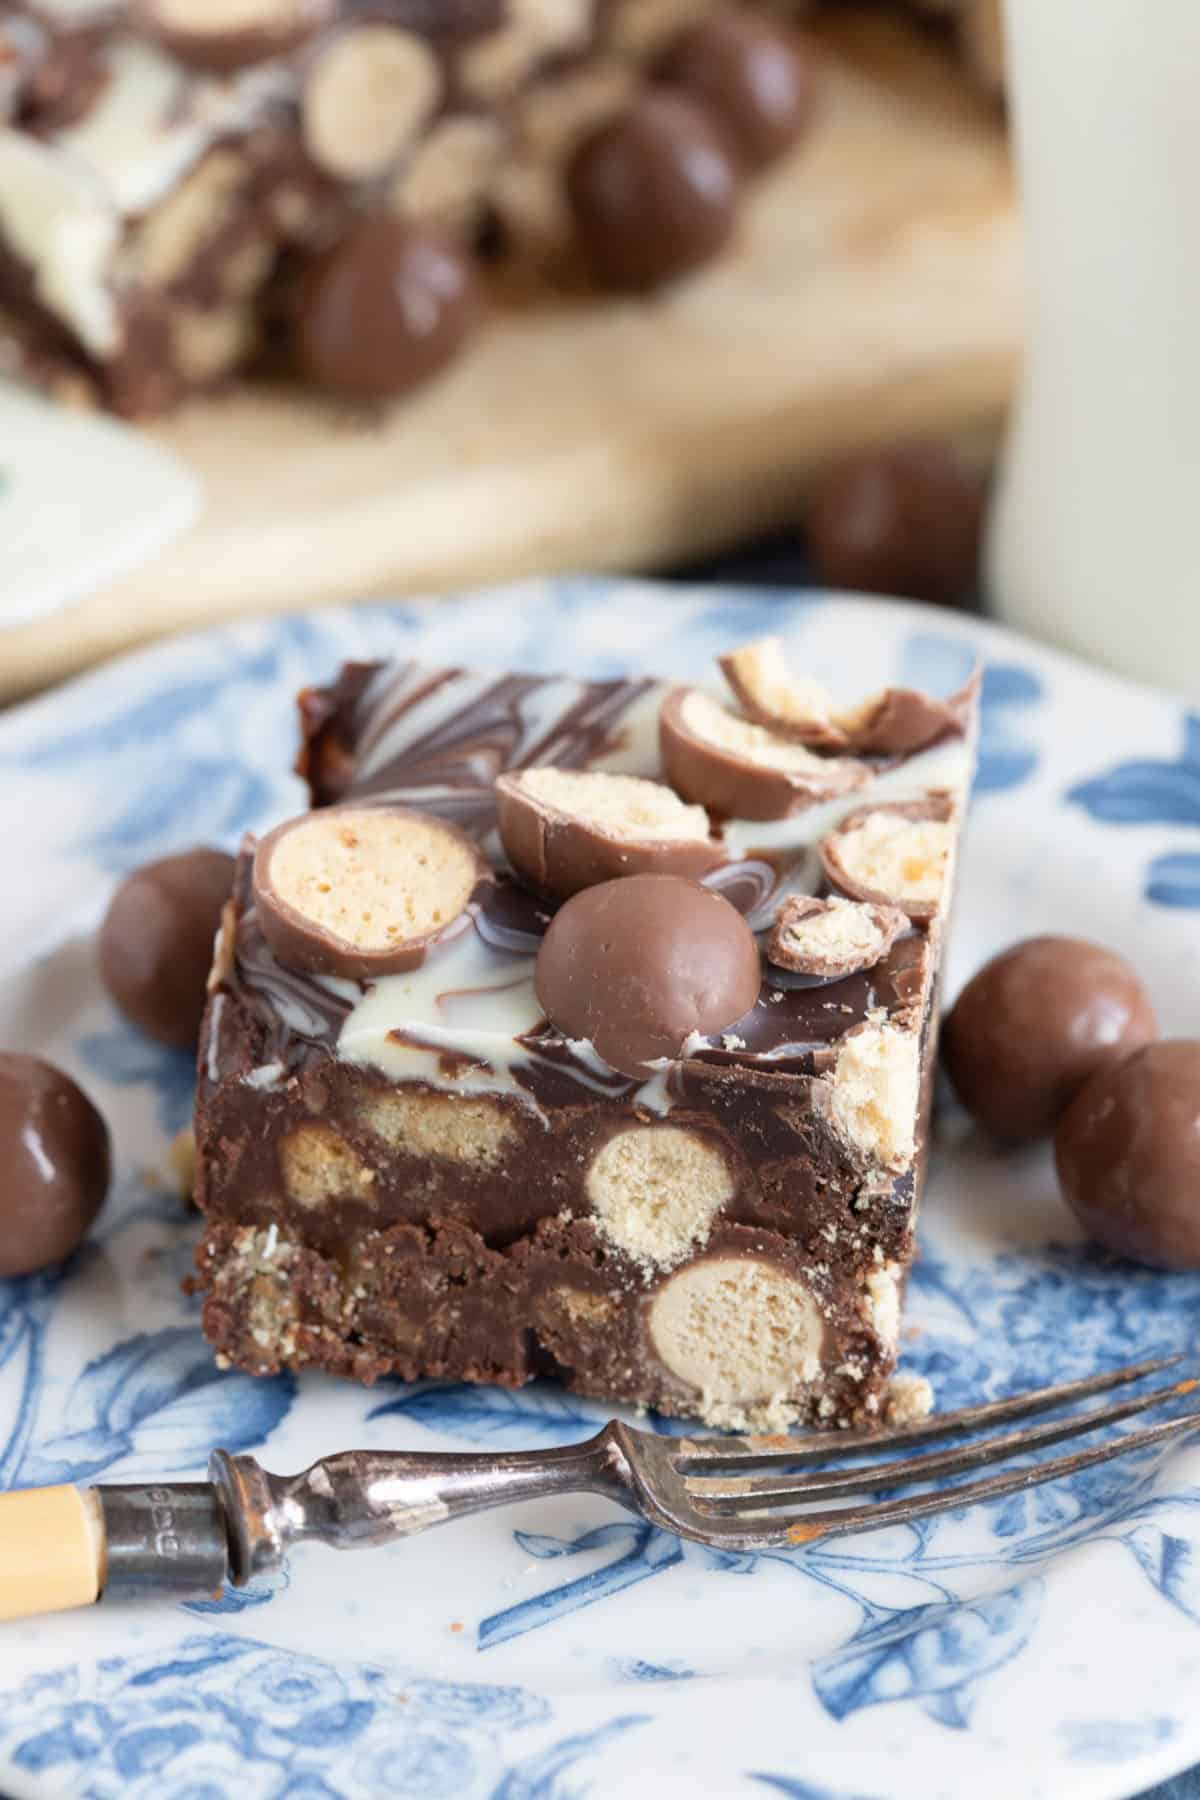 A slice of Malteser tiffin on a blue and white plate.